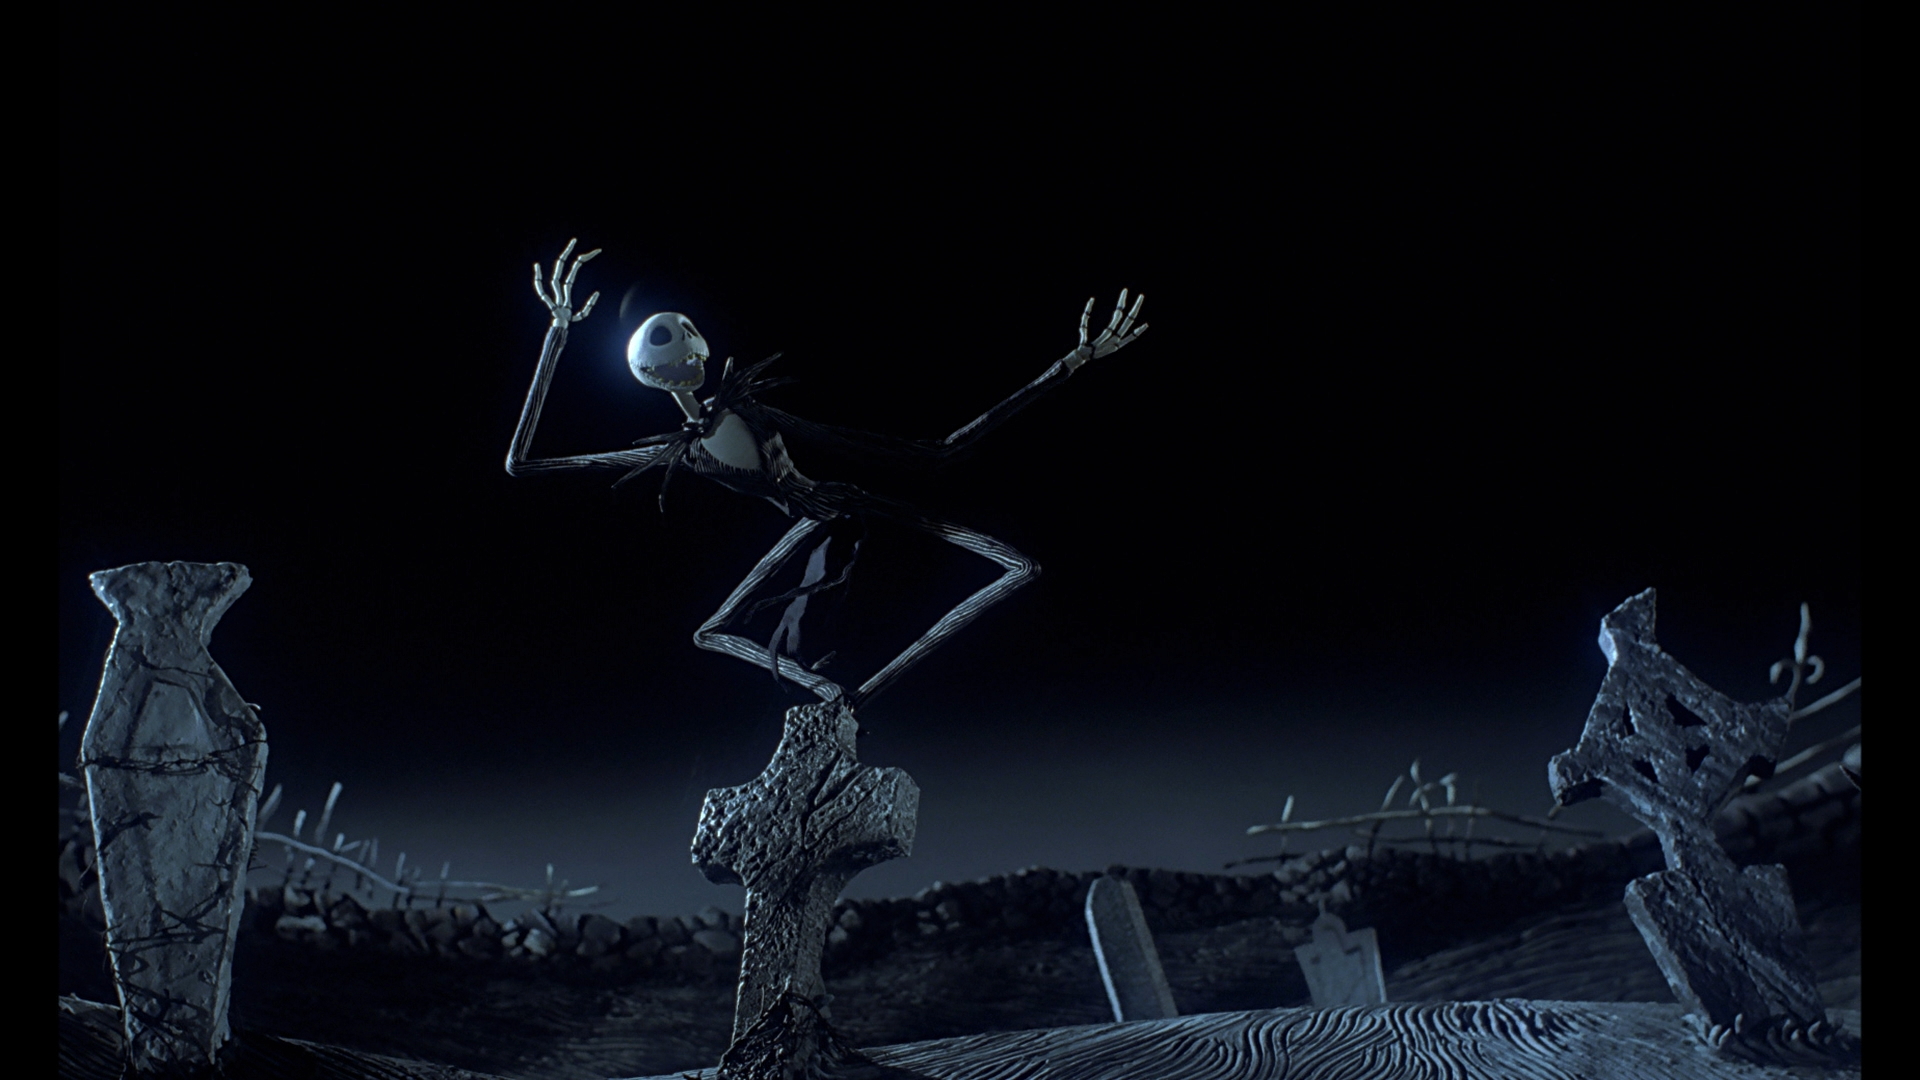 General 1920x1080 movies The Nightmare Before Christmas animated movies film stills